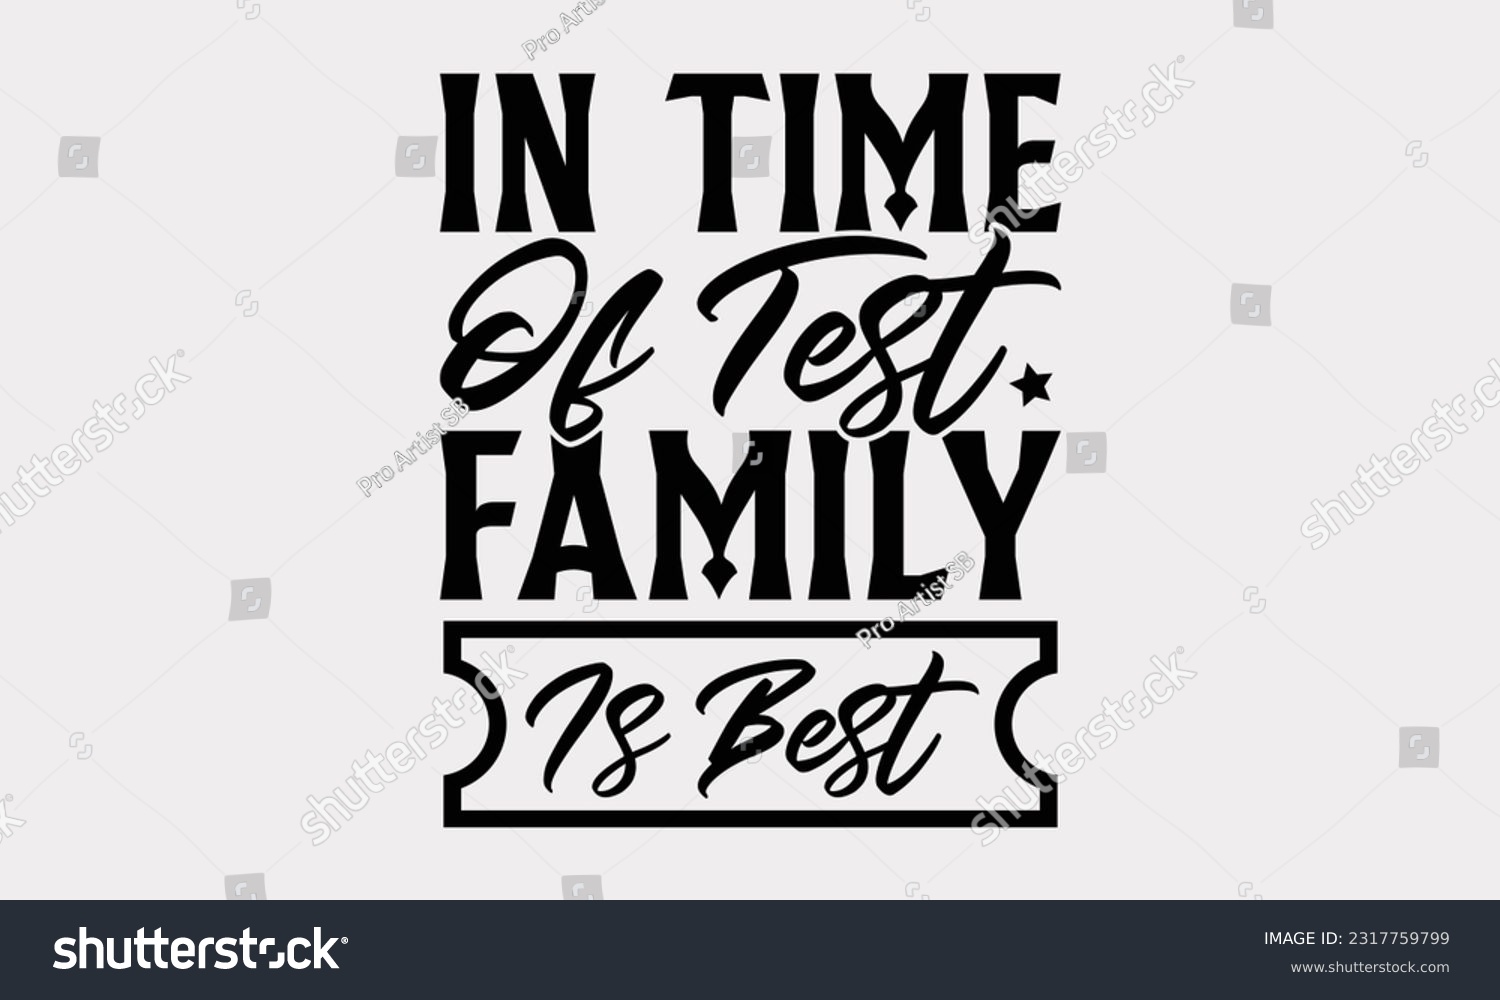 SVG of In Time Of Test Family Is Best - Family SVG Design, Hand Lettering Phrase Isolated On White Background, Modern Calligraphy Vector, SVG File For Cutting. svg